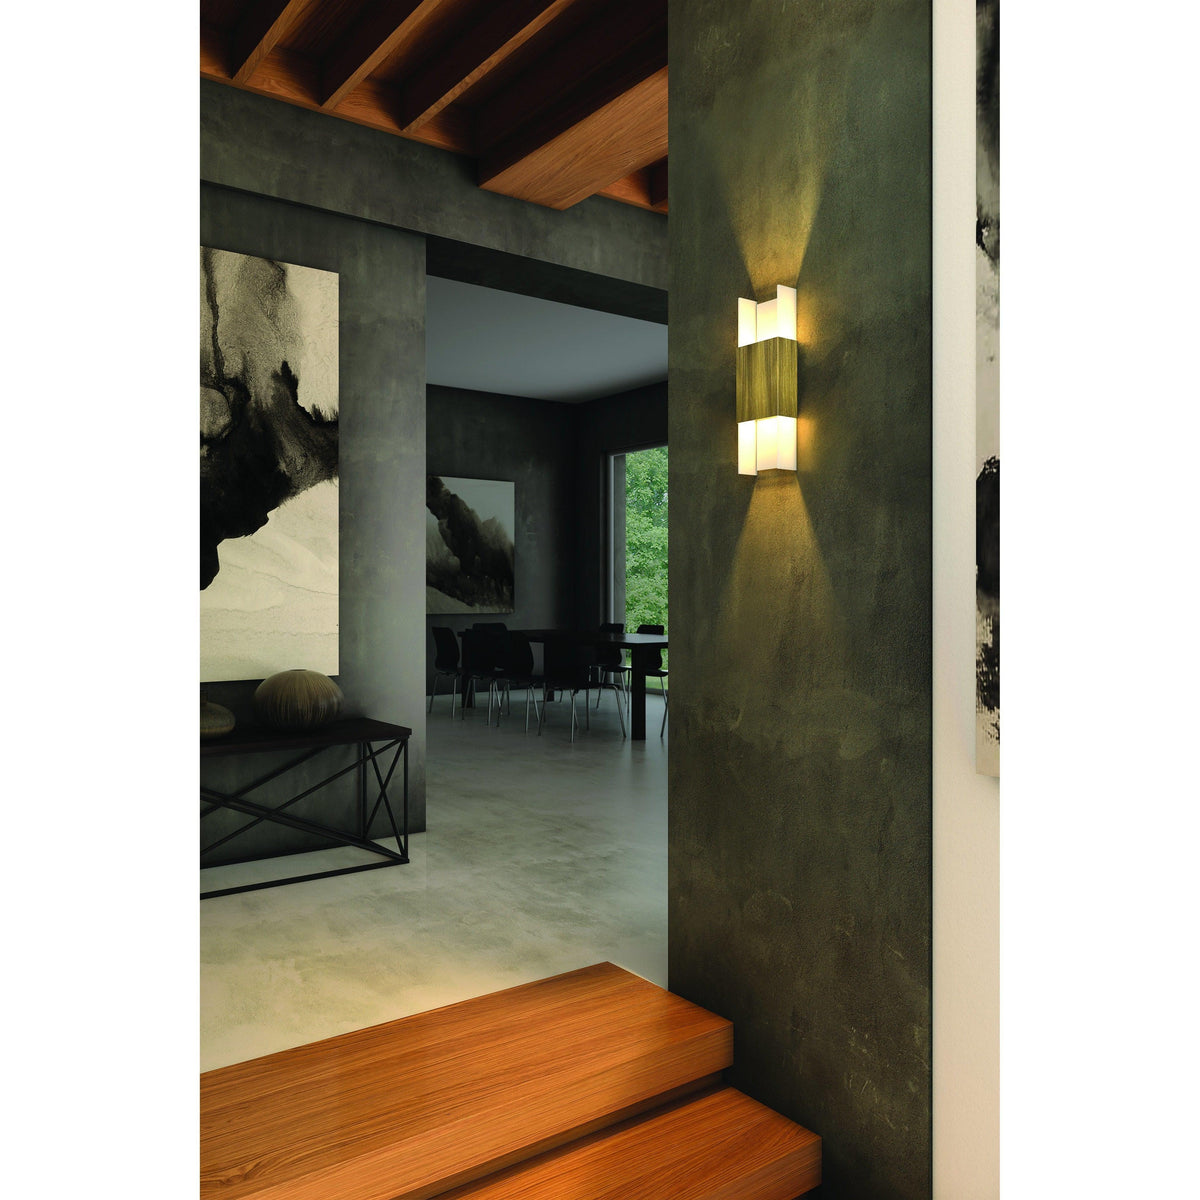 Cerno - Ansa LED Wall Sconce - 03-137-A-27P1 | Montreal Lighting & Hardware